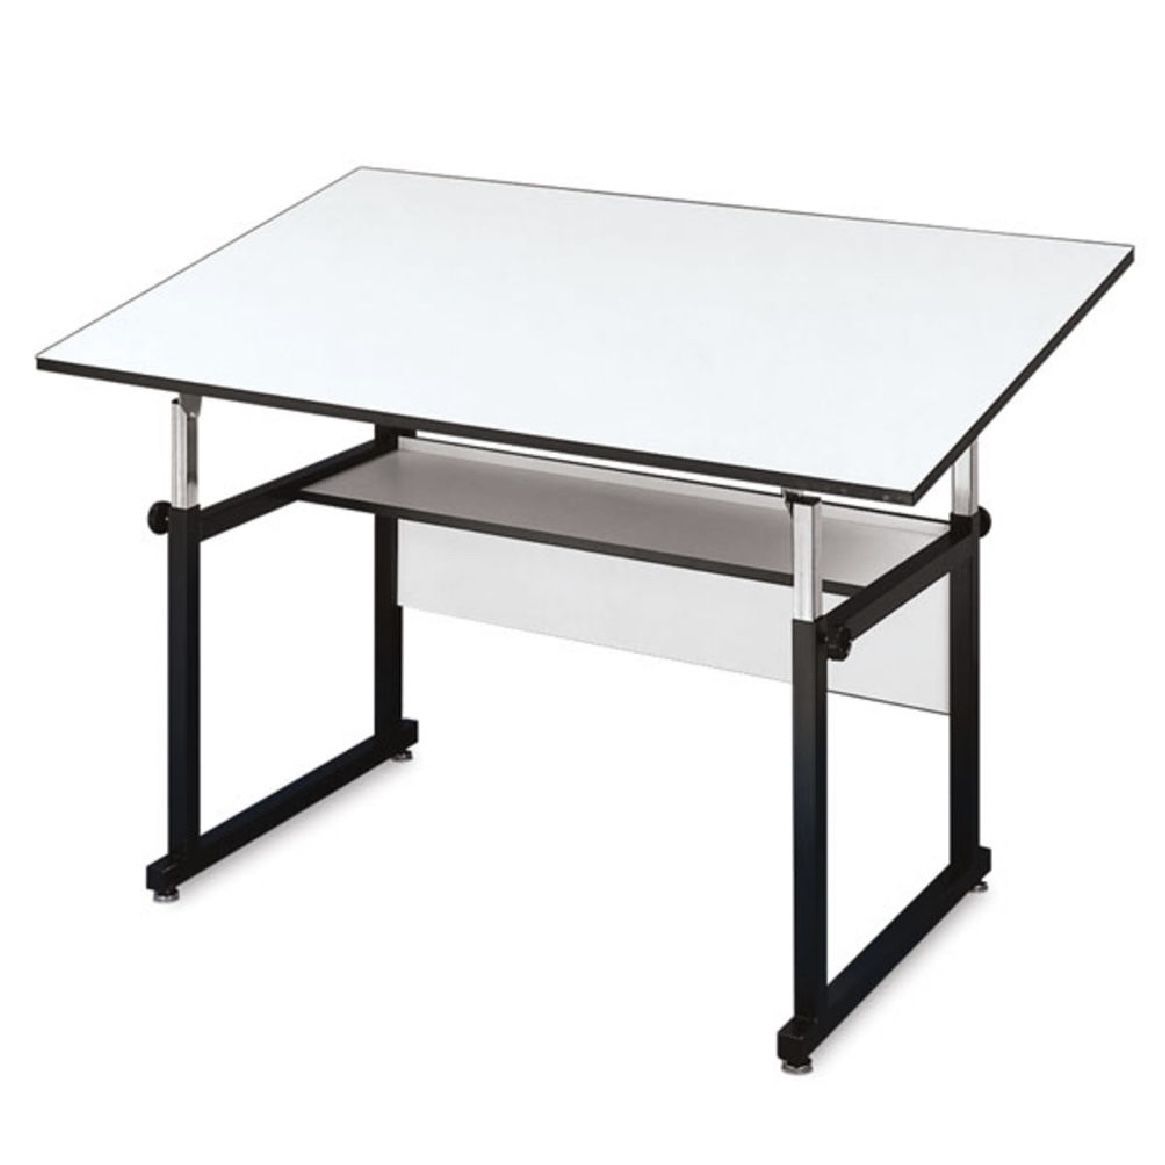 Alvin Work-master Drafting Table, 36”x48”